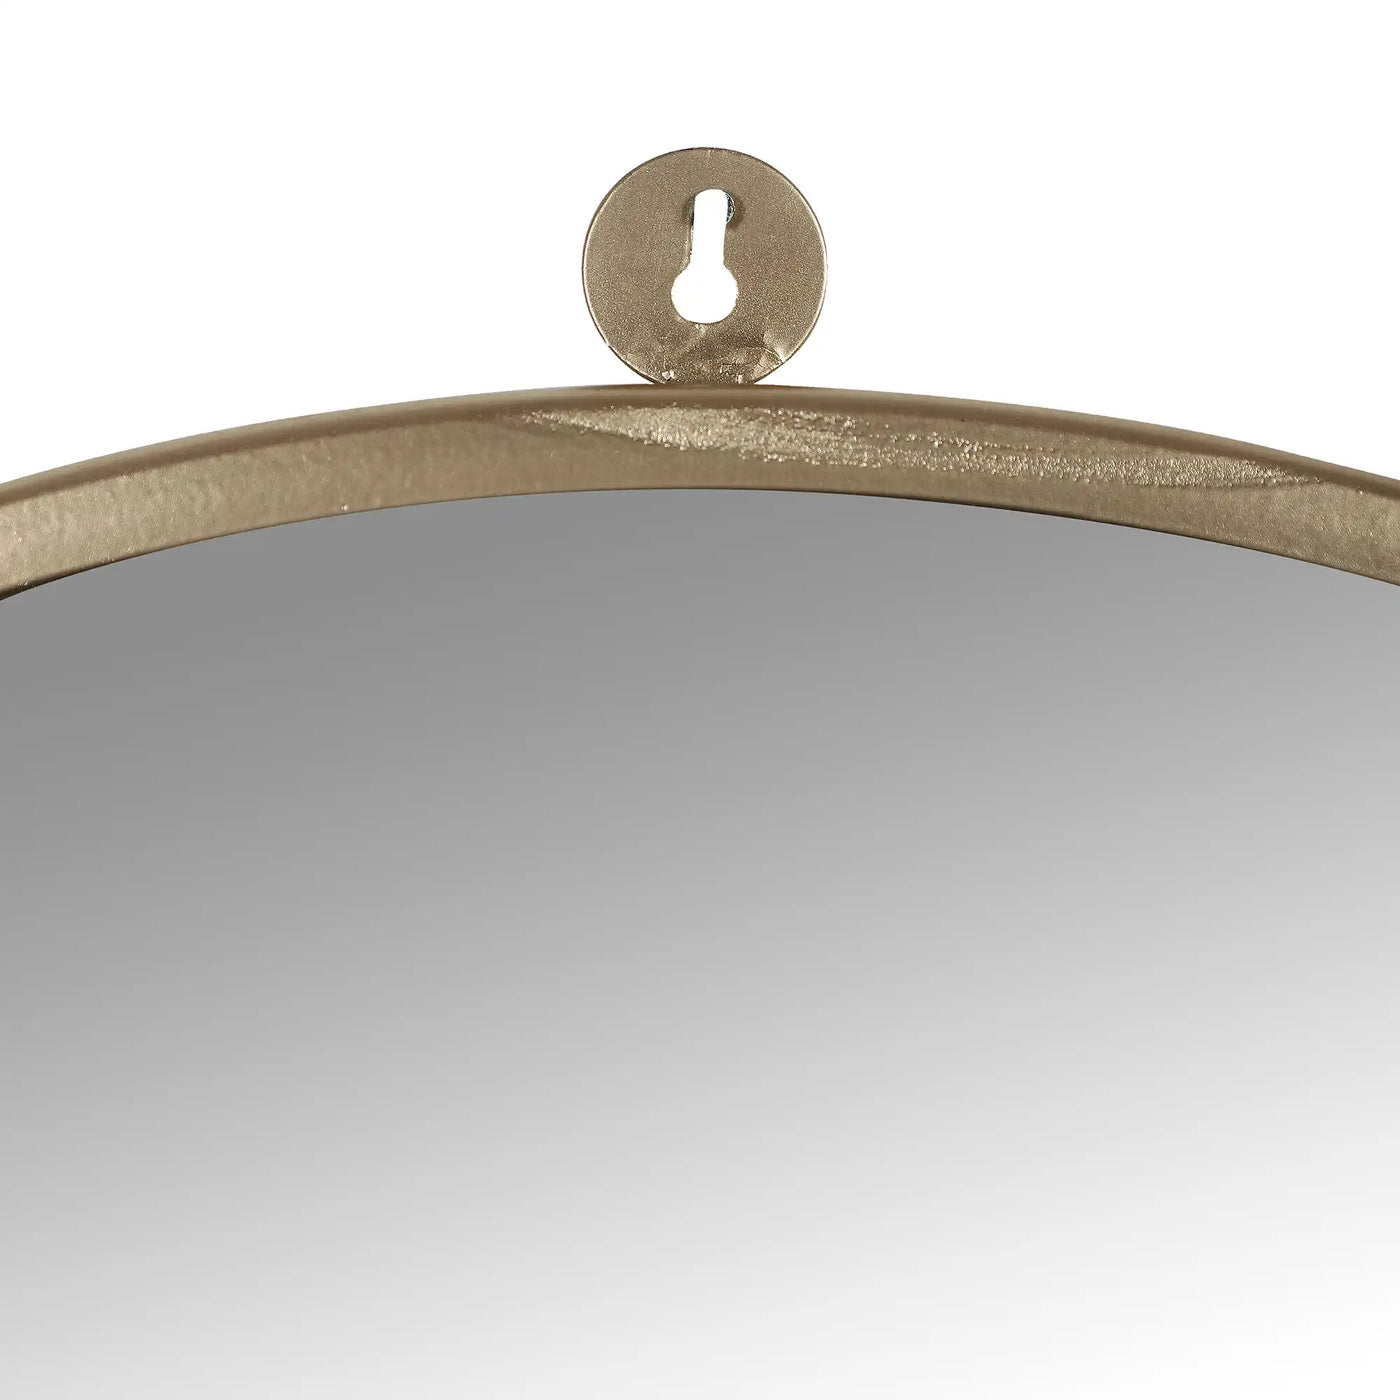 Gold Feather Wall Mirror